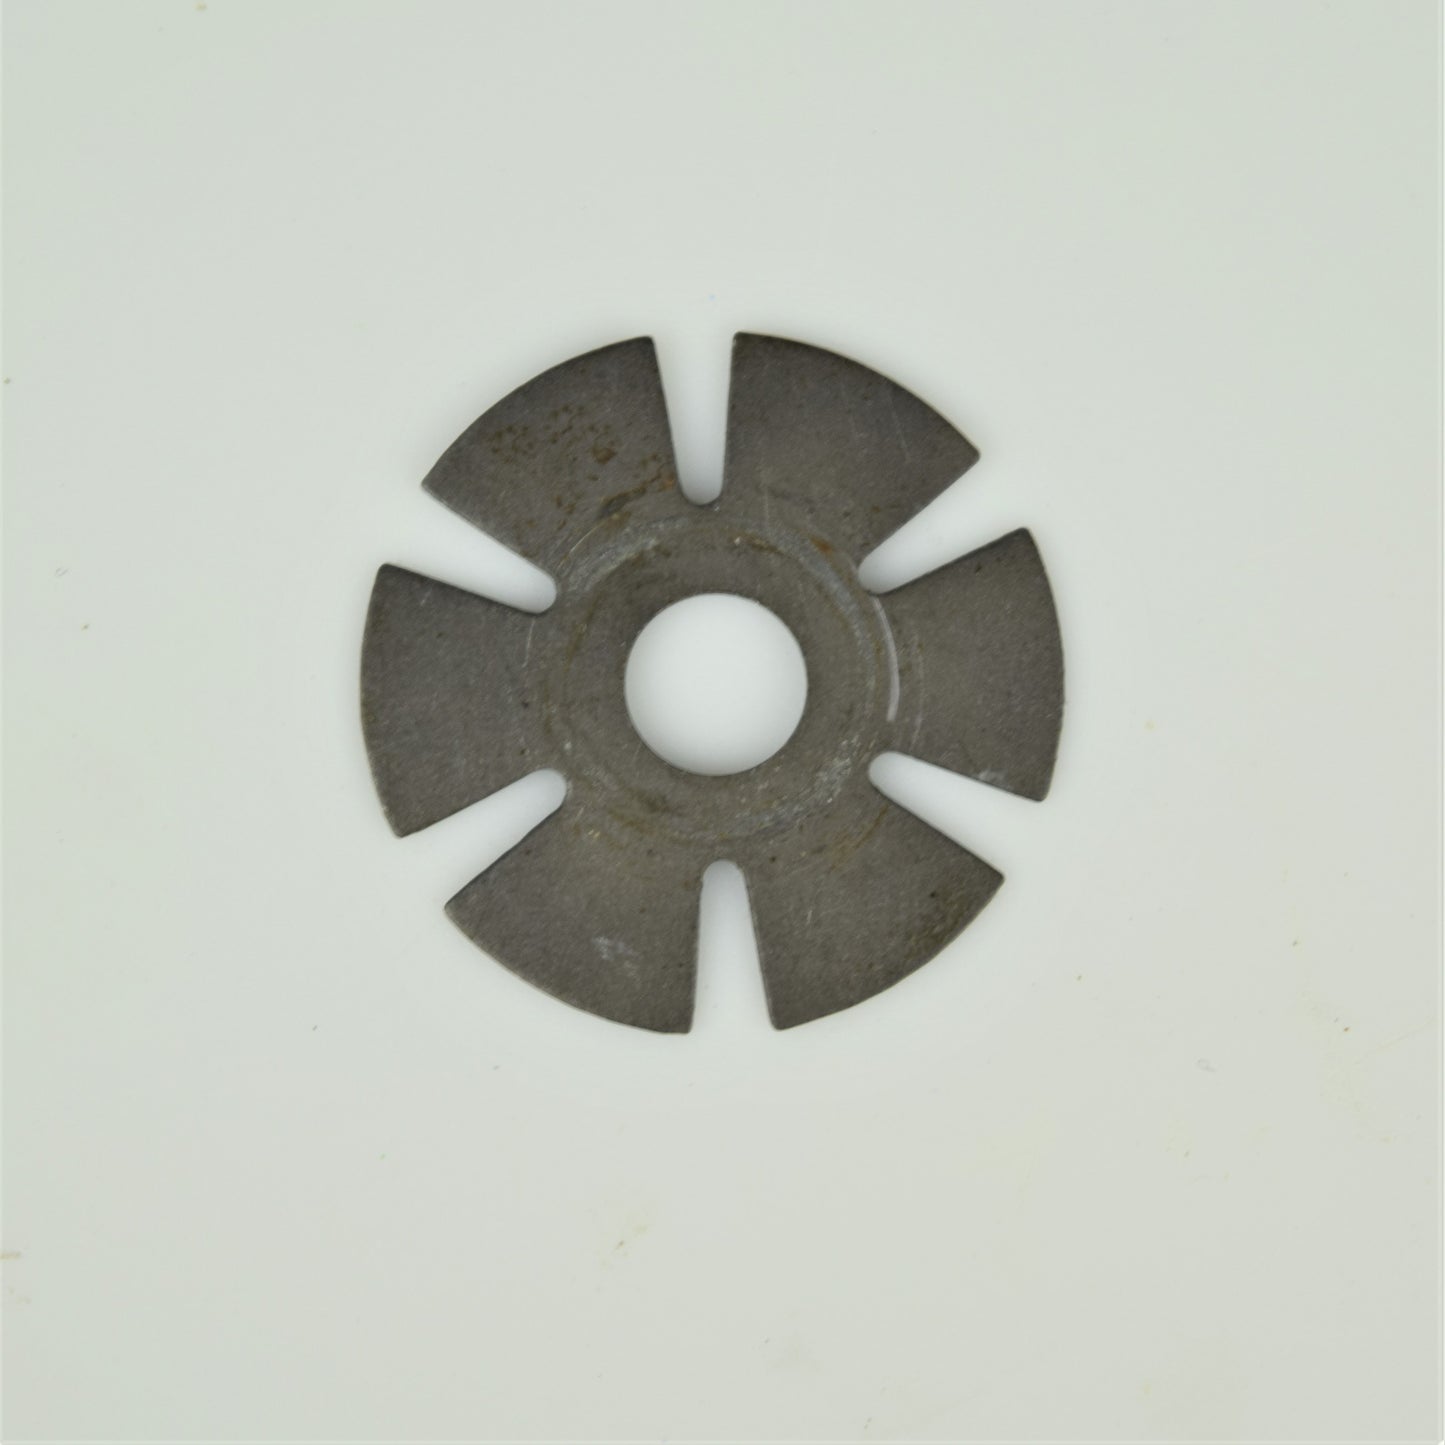 Western Electric Dial Washer